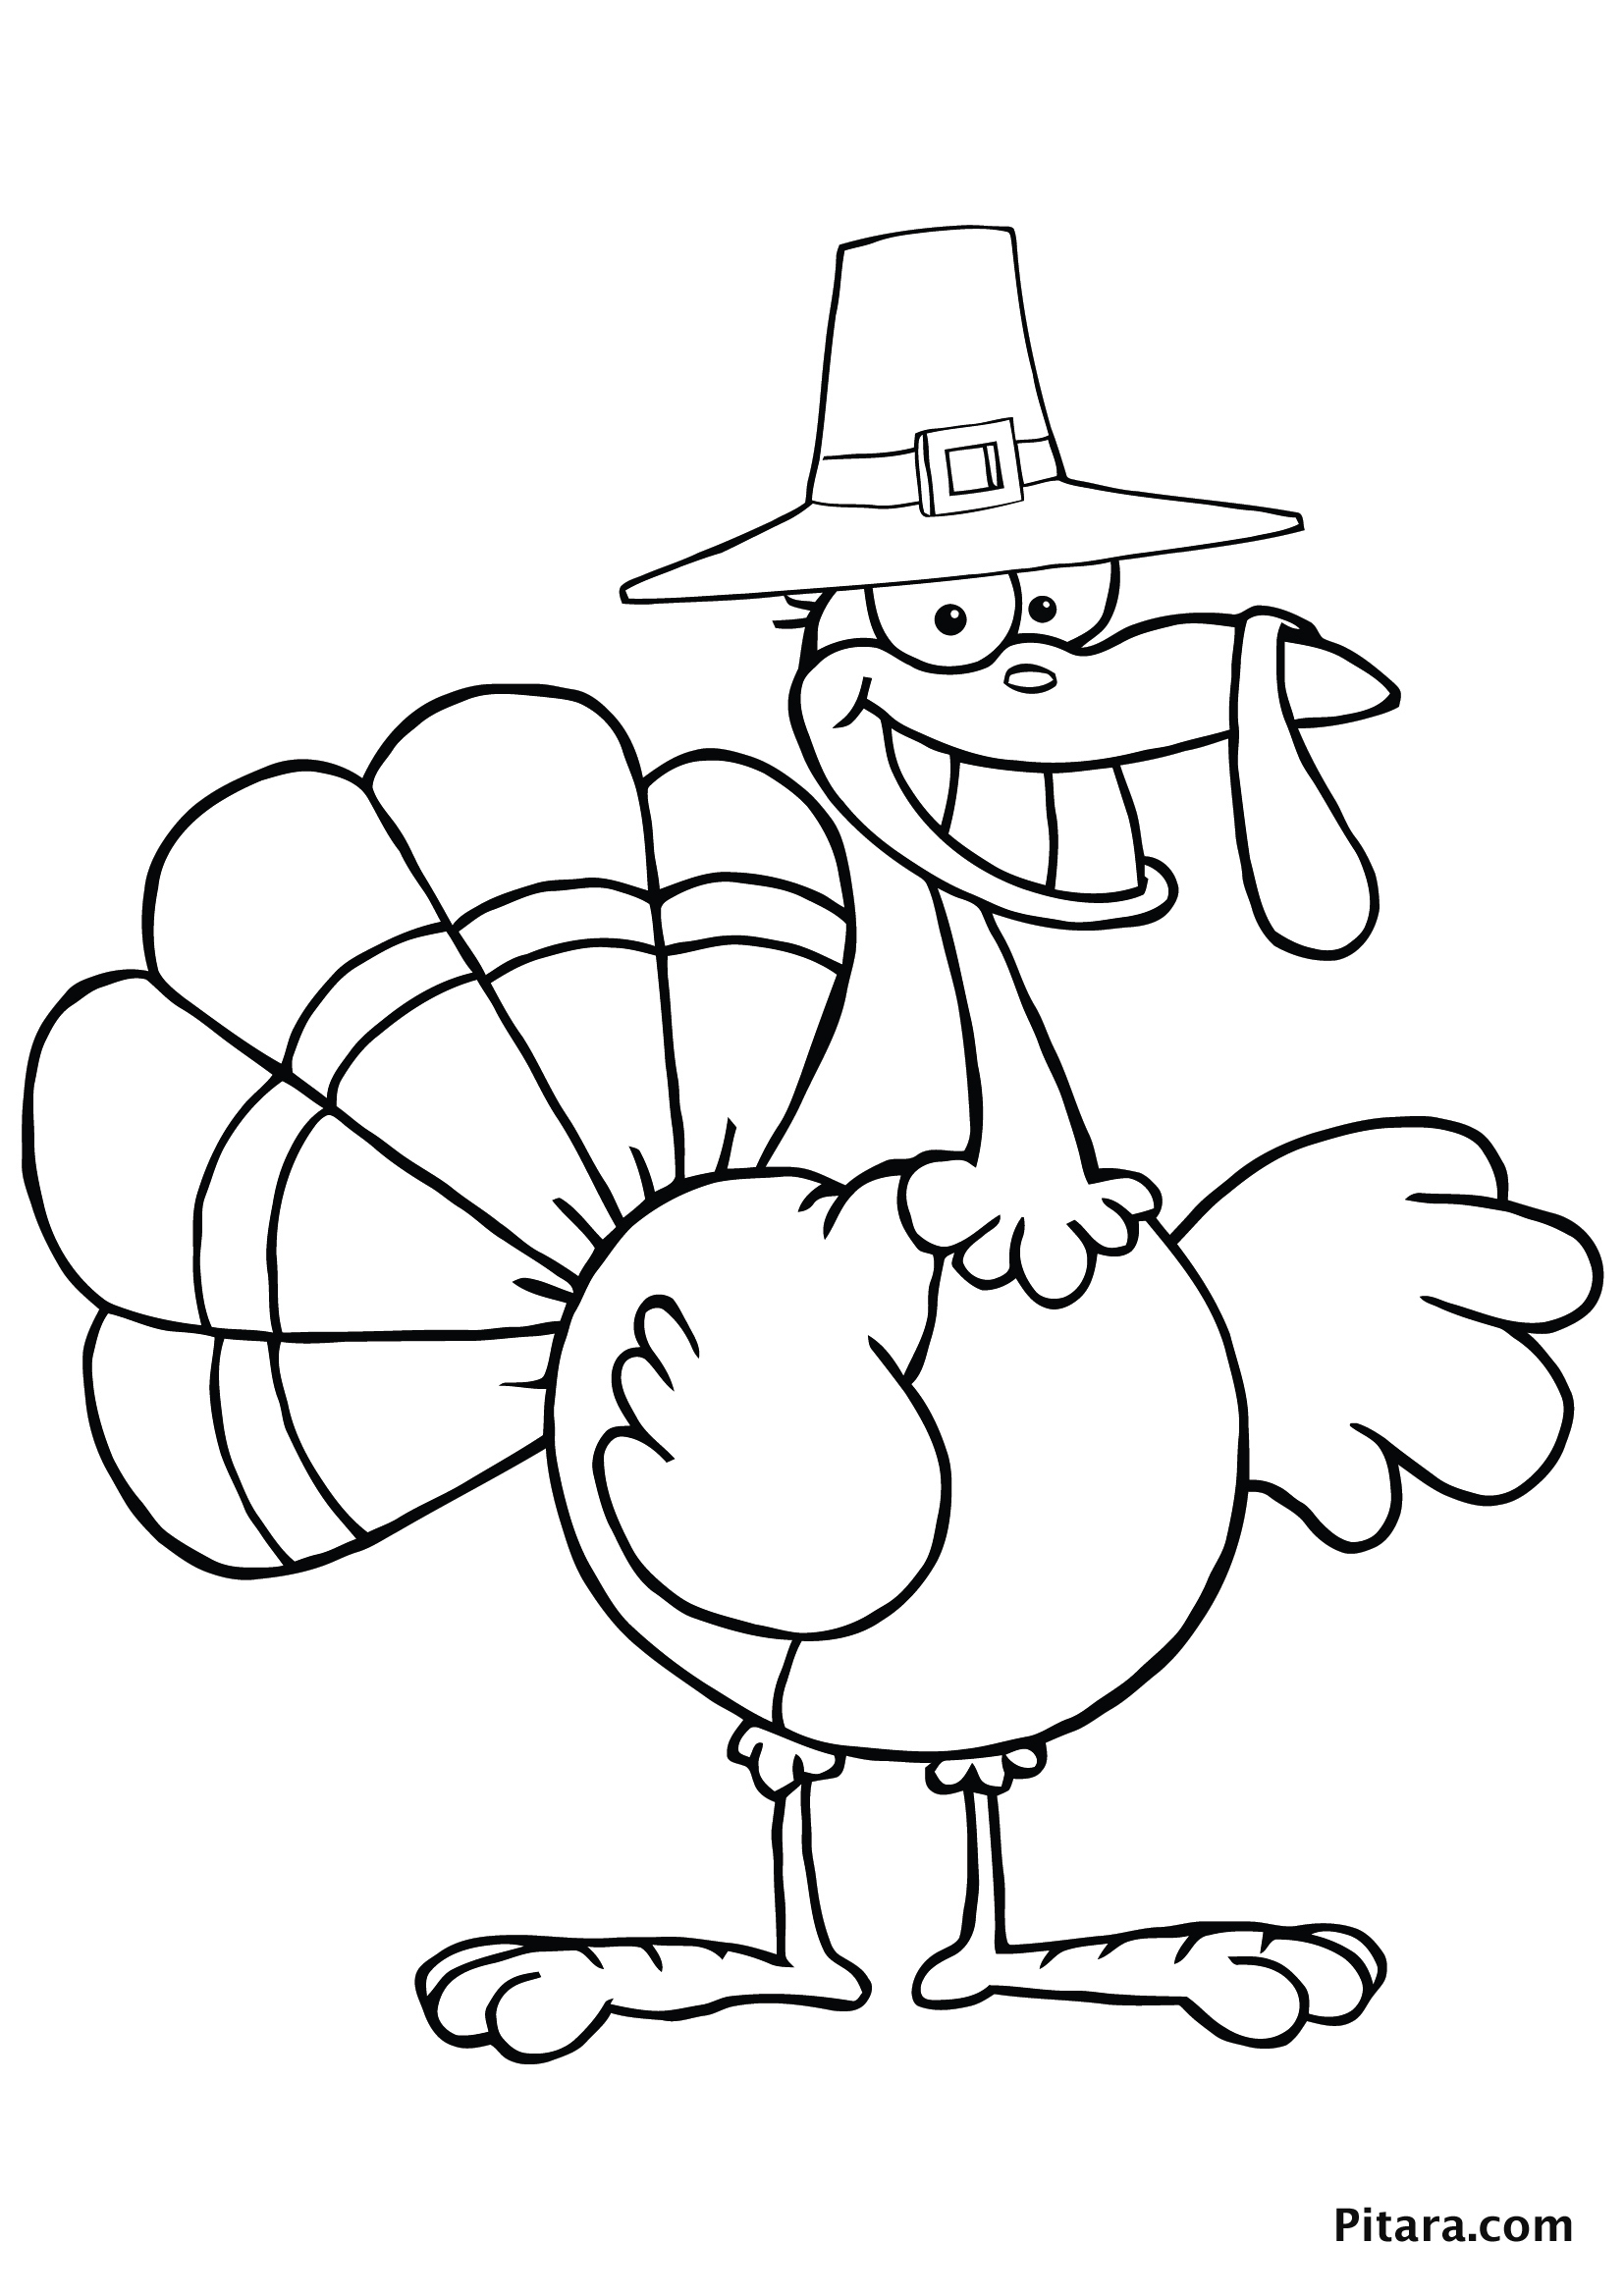 Download Turkey Coloring Pages for Kids | Pitara Kids Network